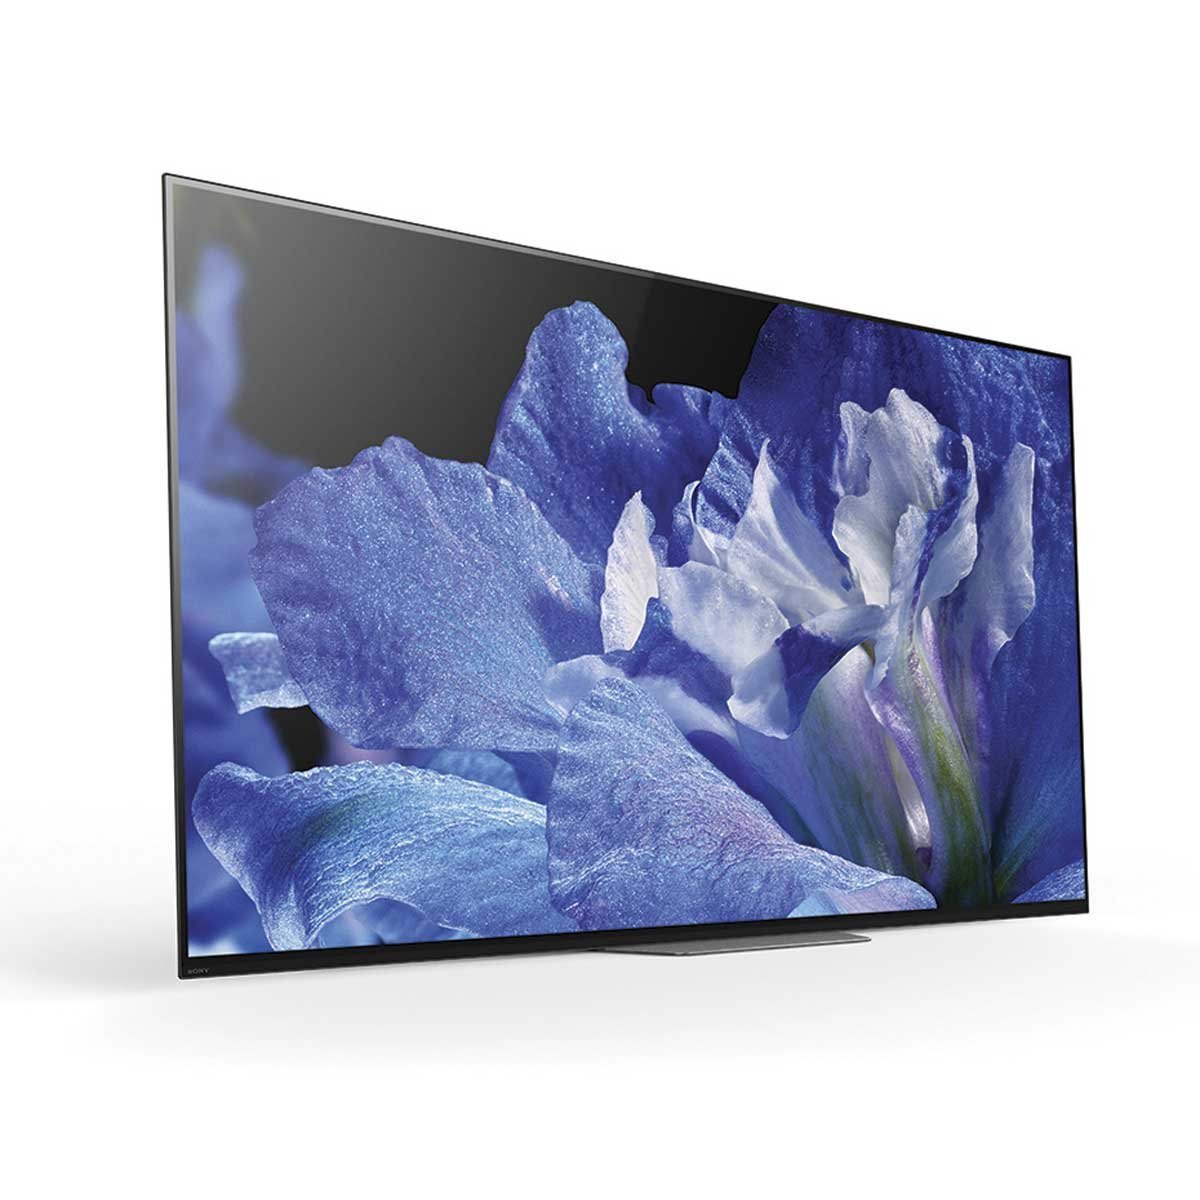 Pantalla Oled Sony 55&quot; Android 4K Hdr Acostic Surface 55A8F